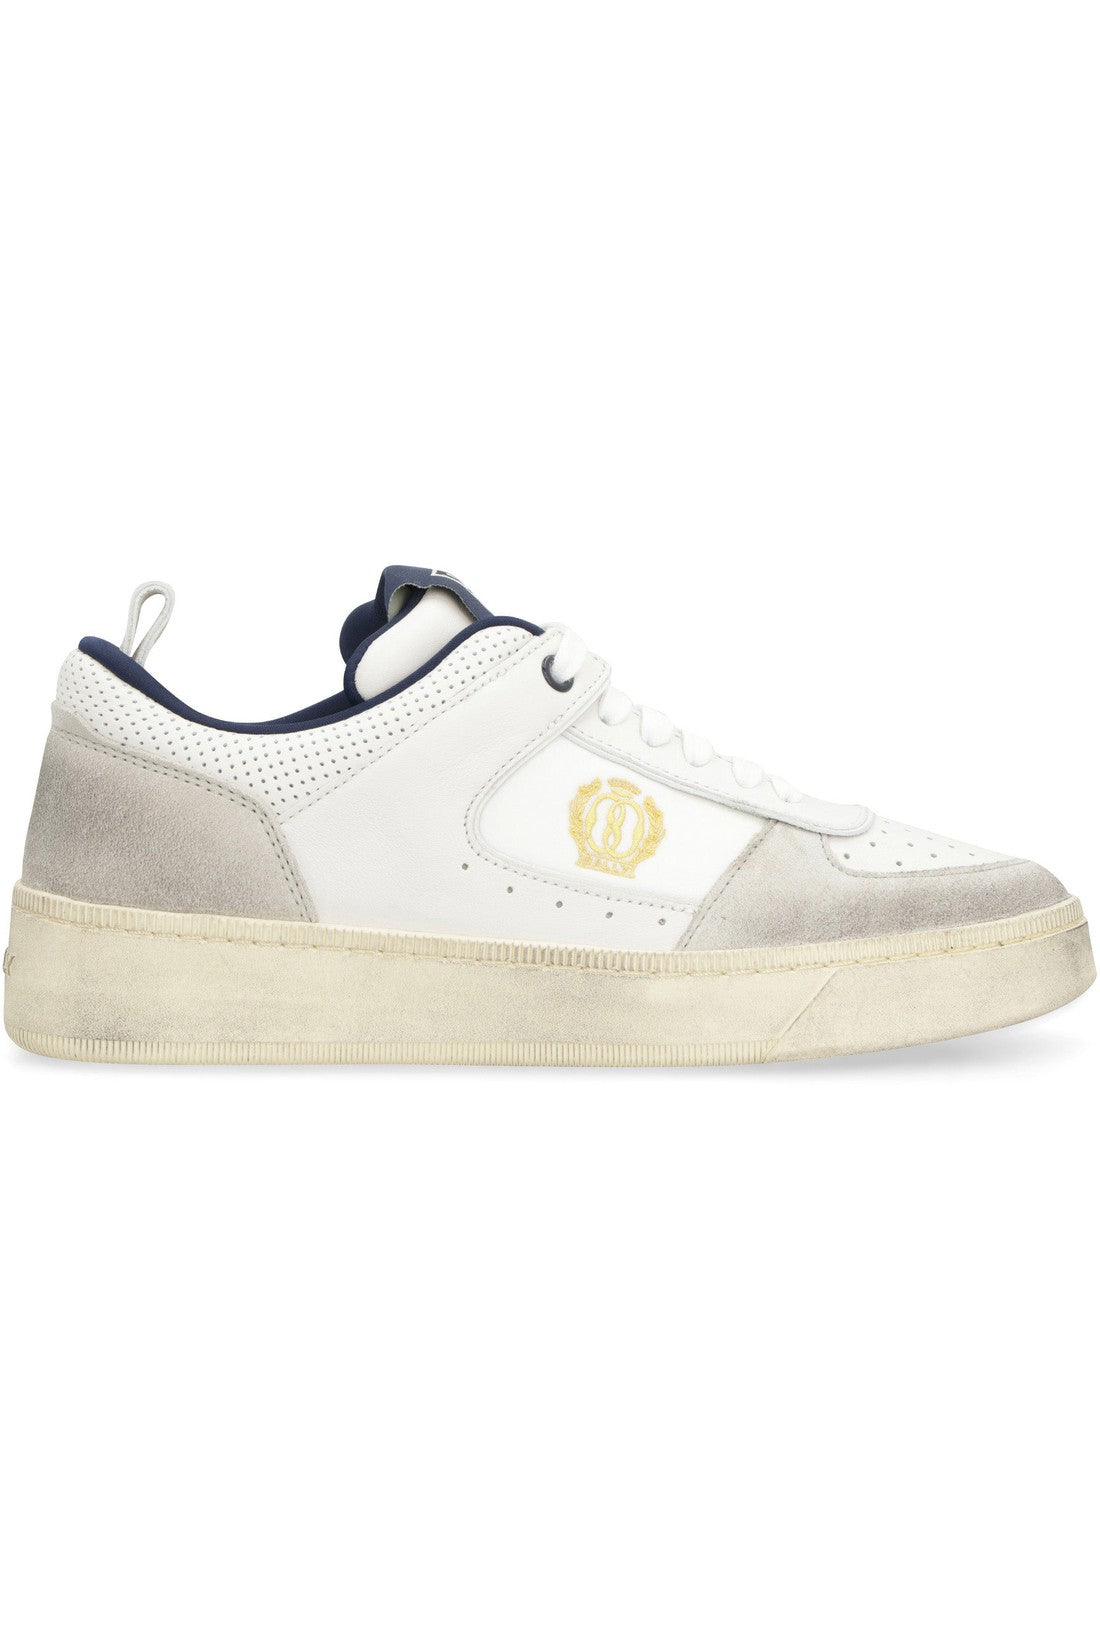 Bally-OUTLET-SALE-Riweira low-top sneakers-ARCHIVIST